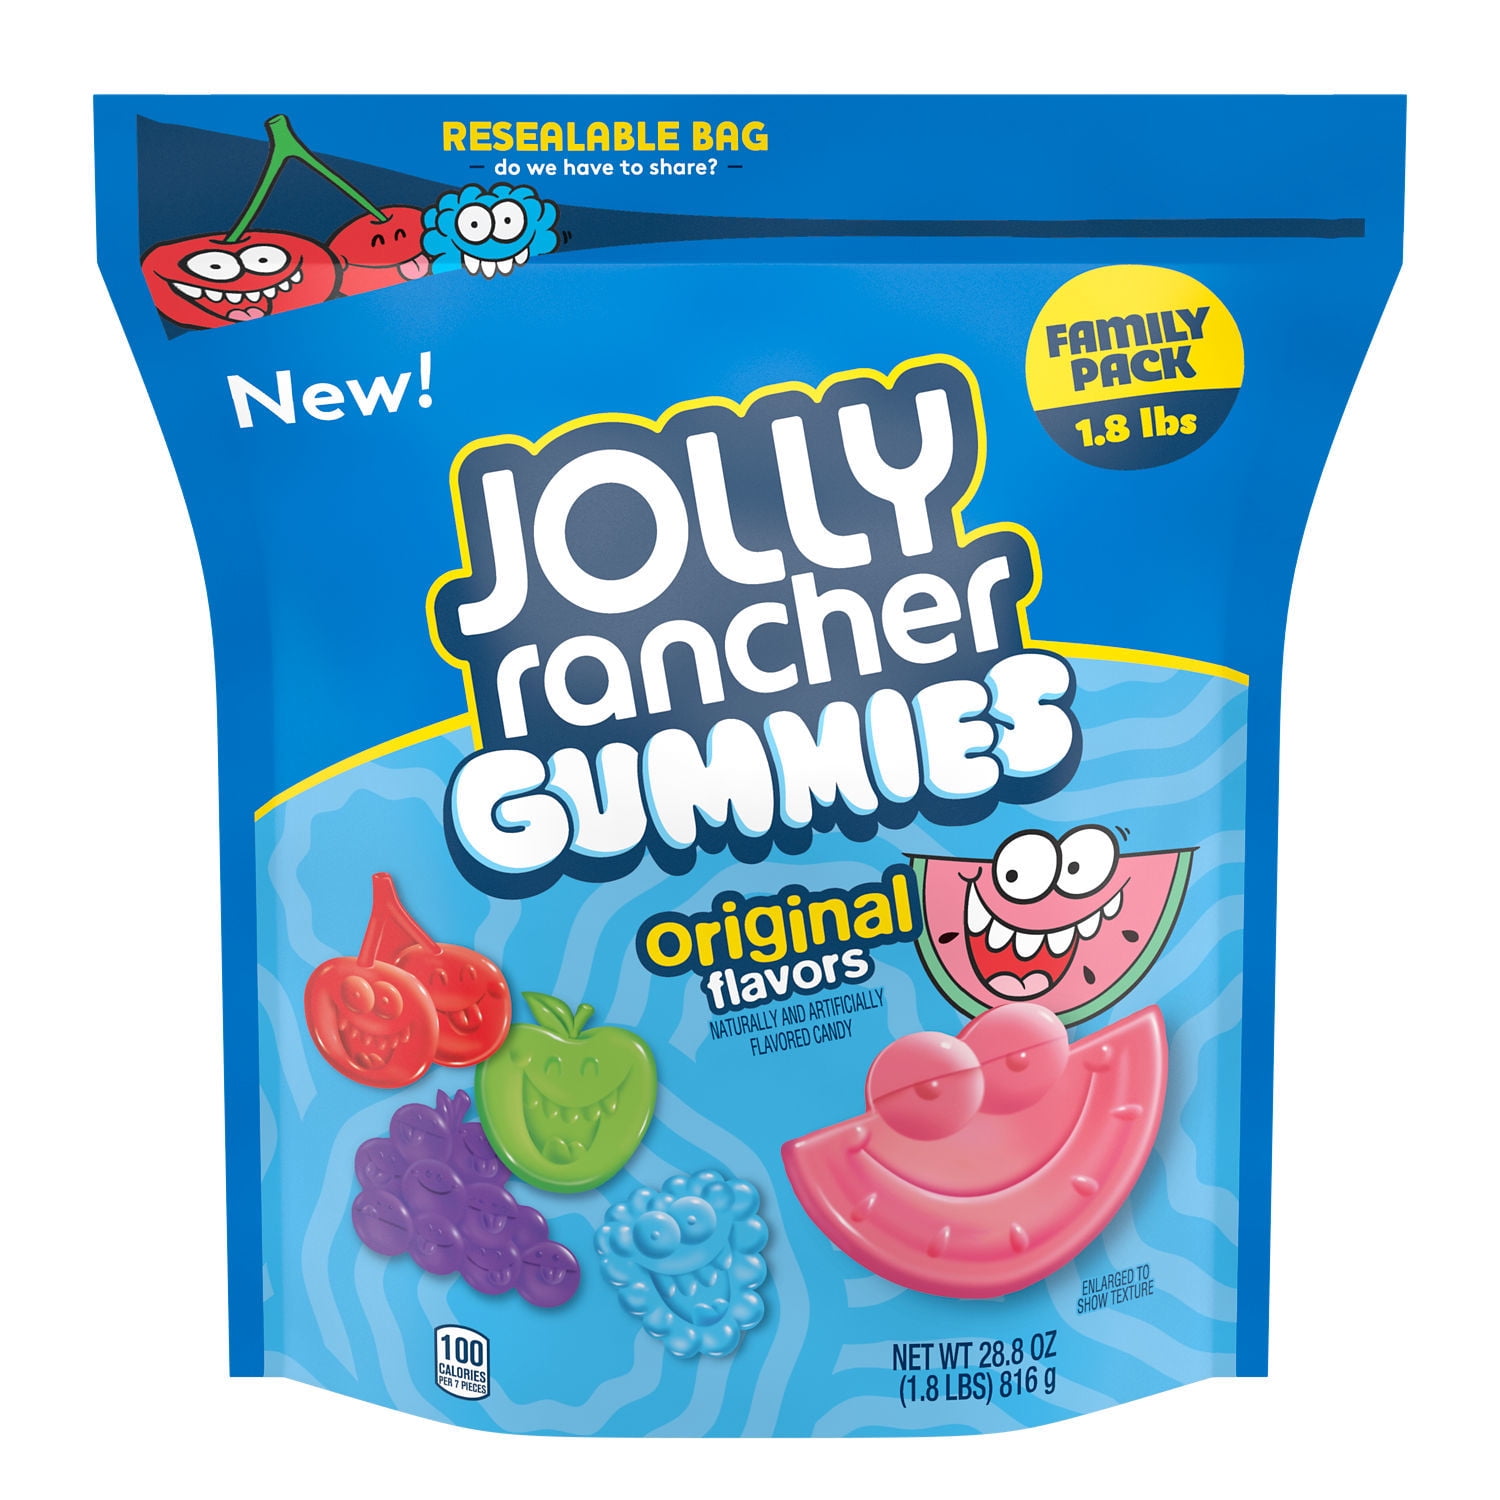 JOLLY RANCHER Assorted Fruit Flavored Chewy, Movie Snack Gummies Candy Resealable Family Pack, 28.8 oz